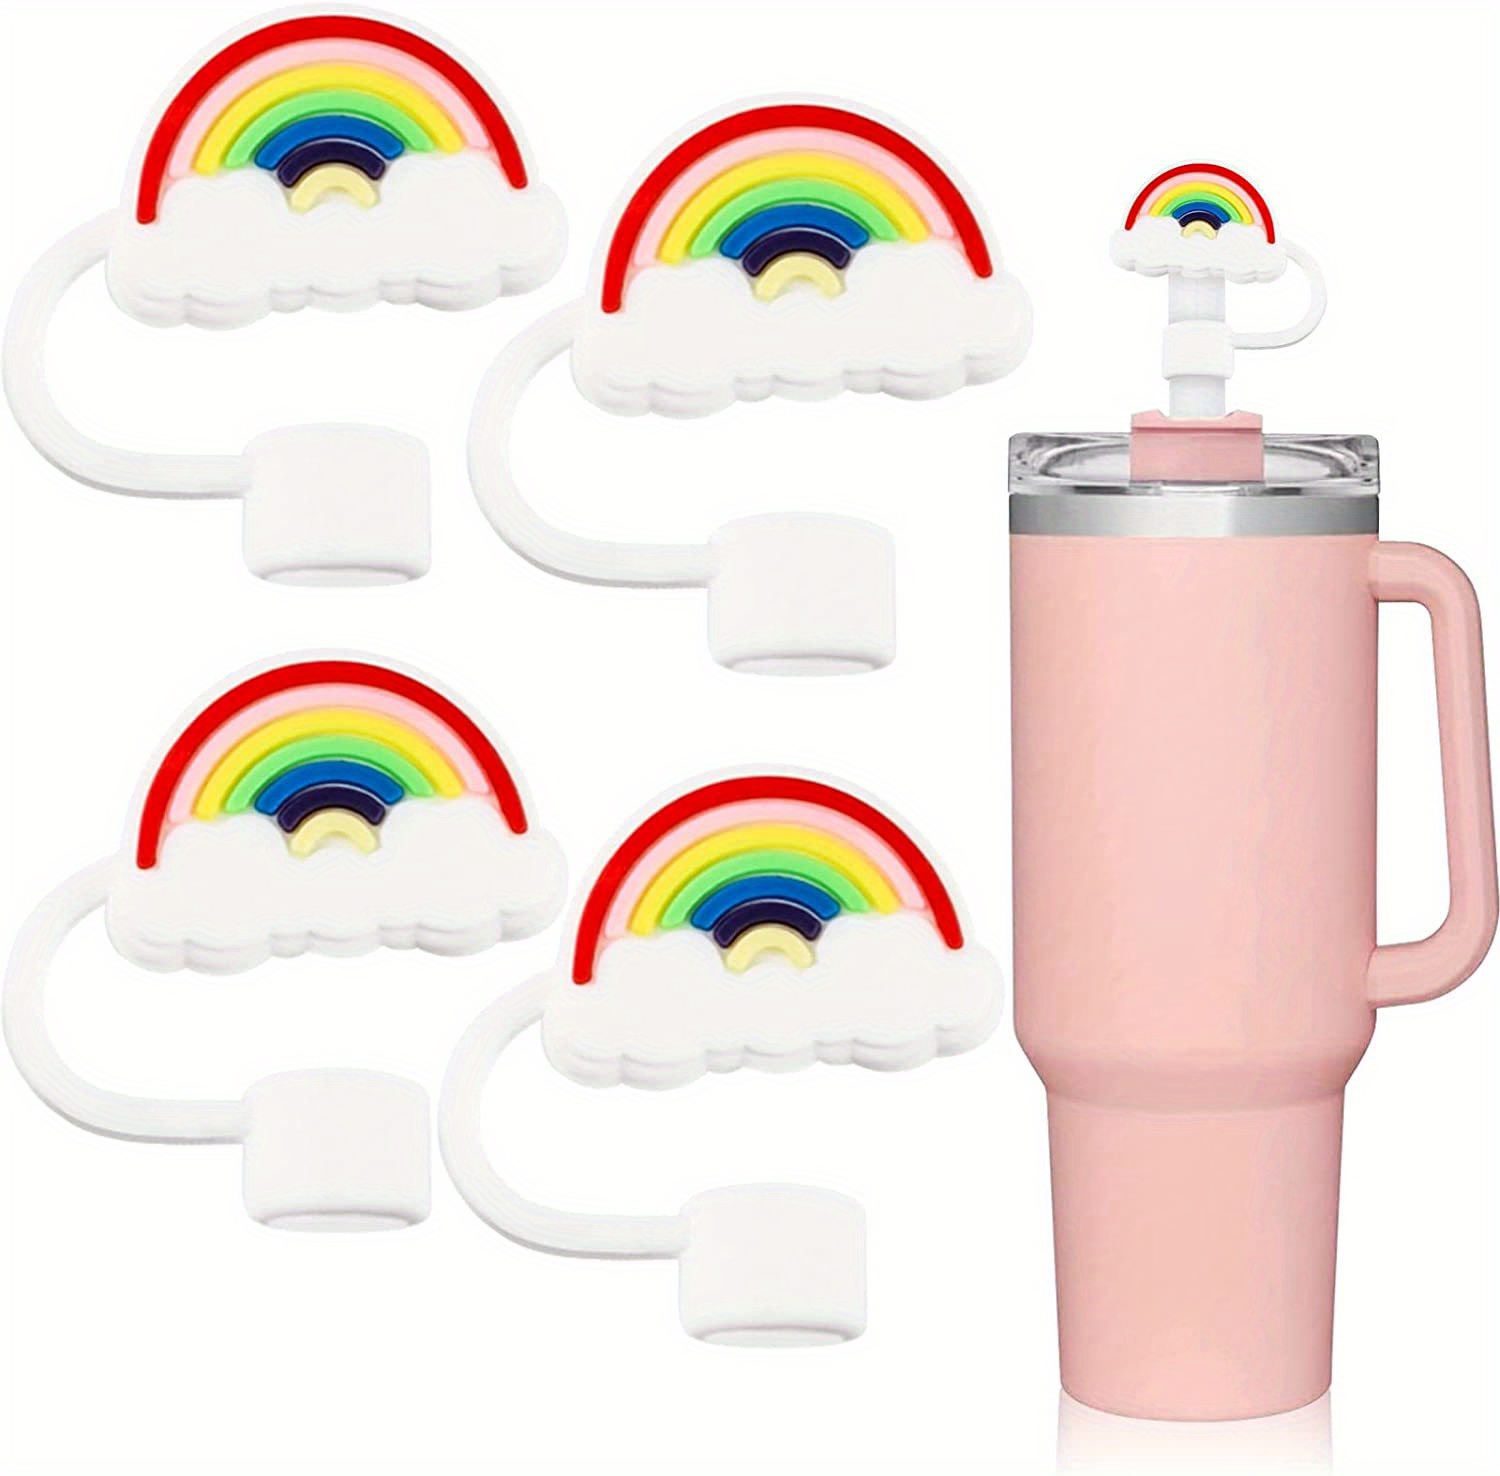 12pcs straw protector cover Reusable Straw Cap Silicone Straw Tip Covers